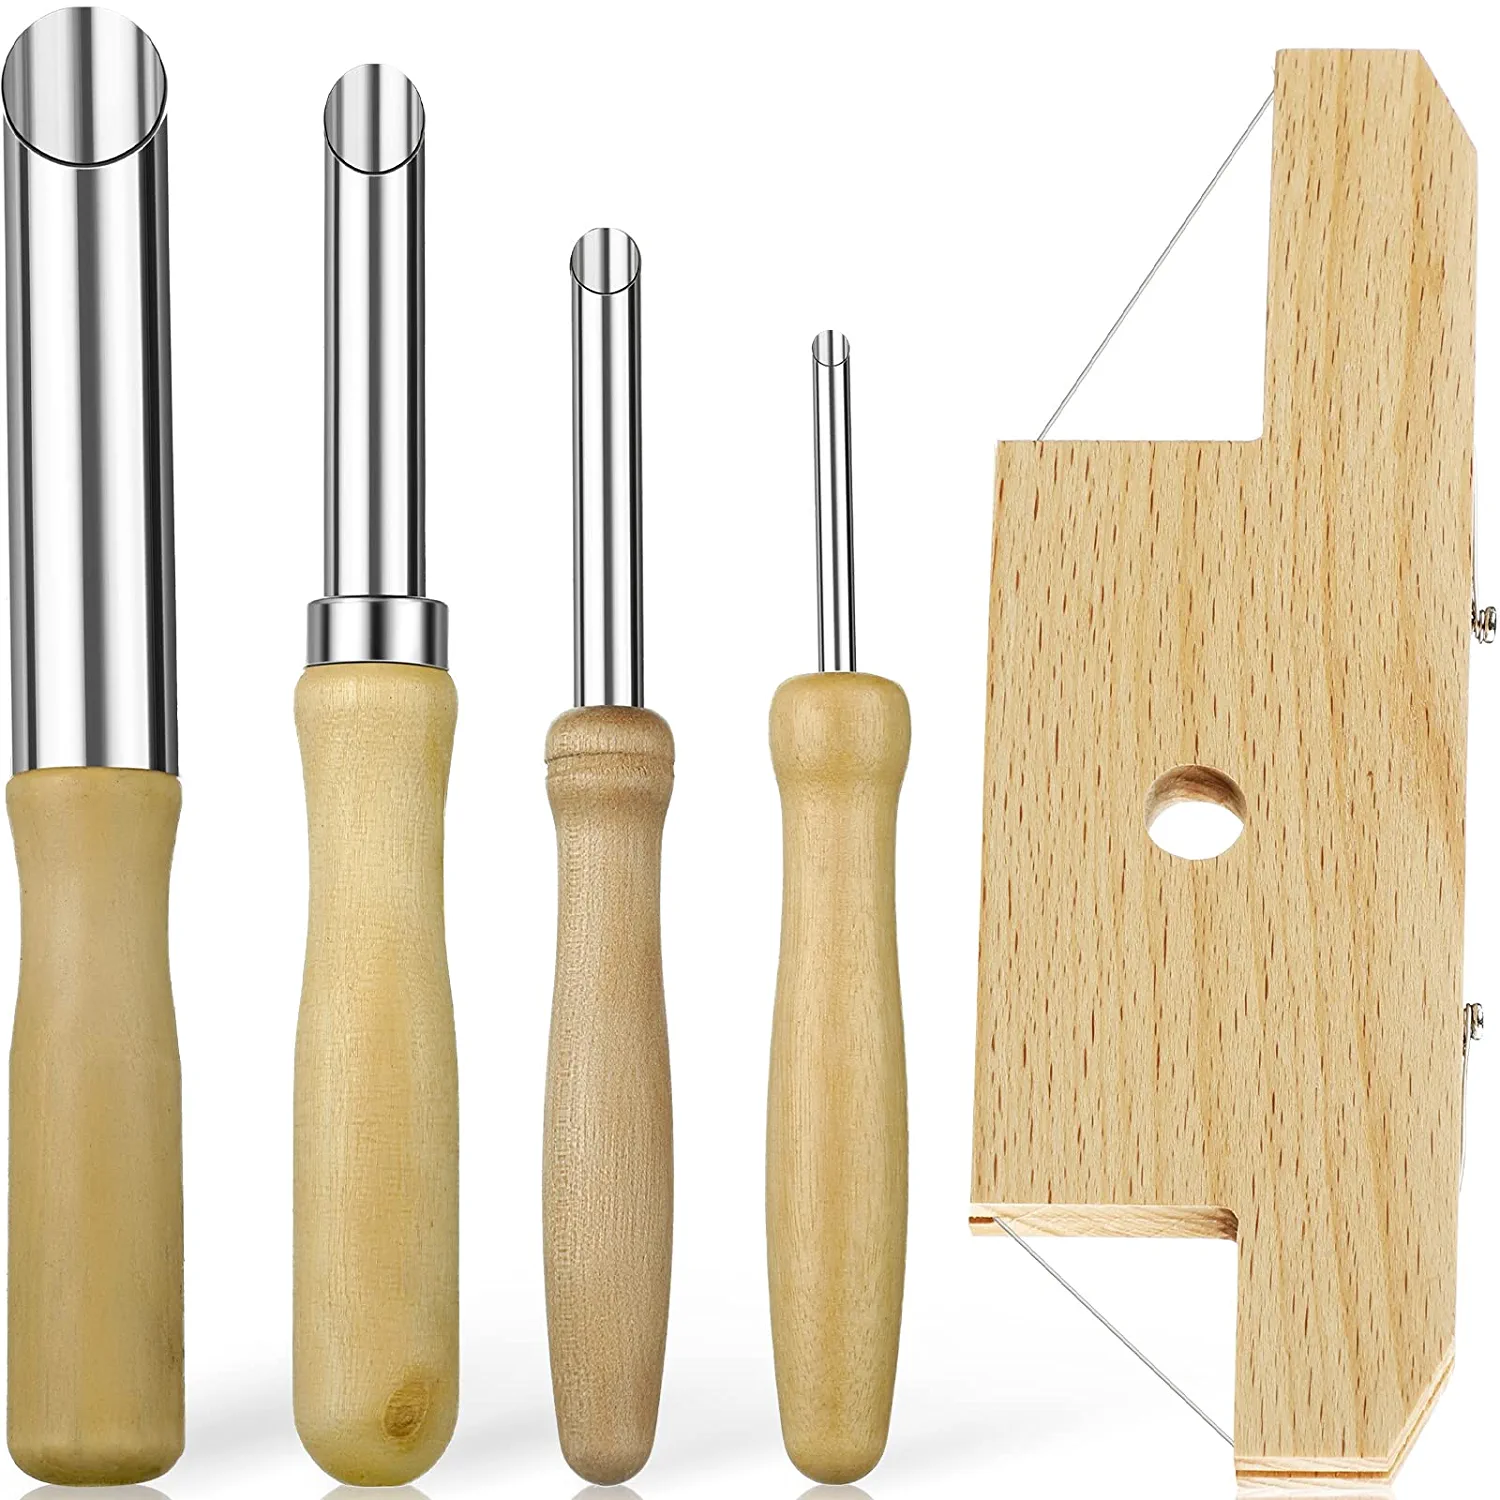 5 Pcs Pottery Clay Tools Set Includes Wood And Wire Bevel Cutter And 4 P... - £15.97 GBP